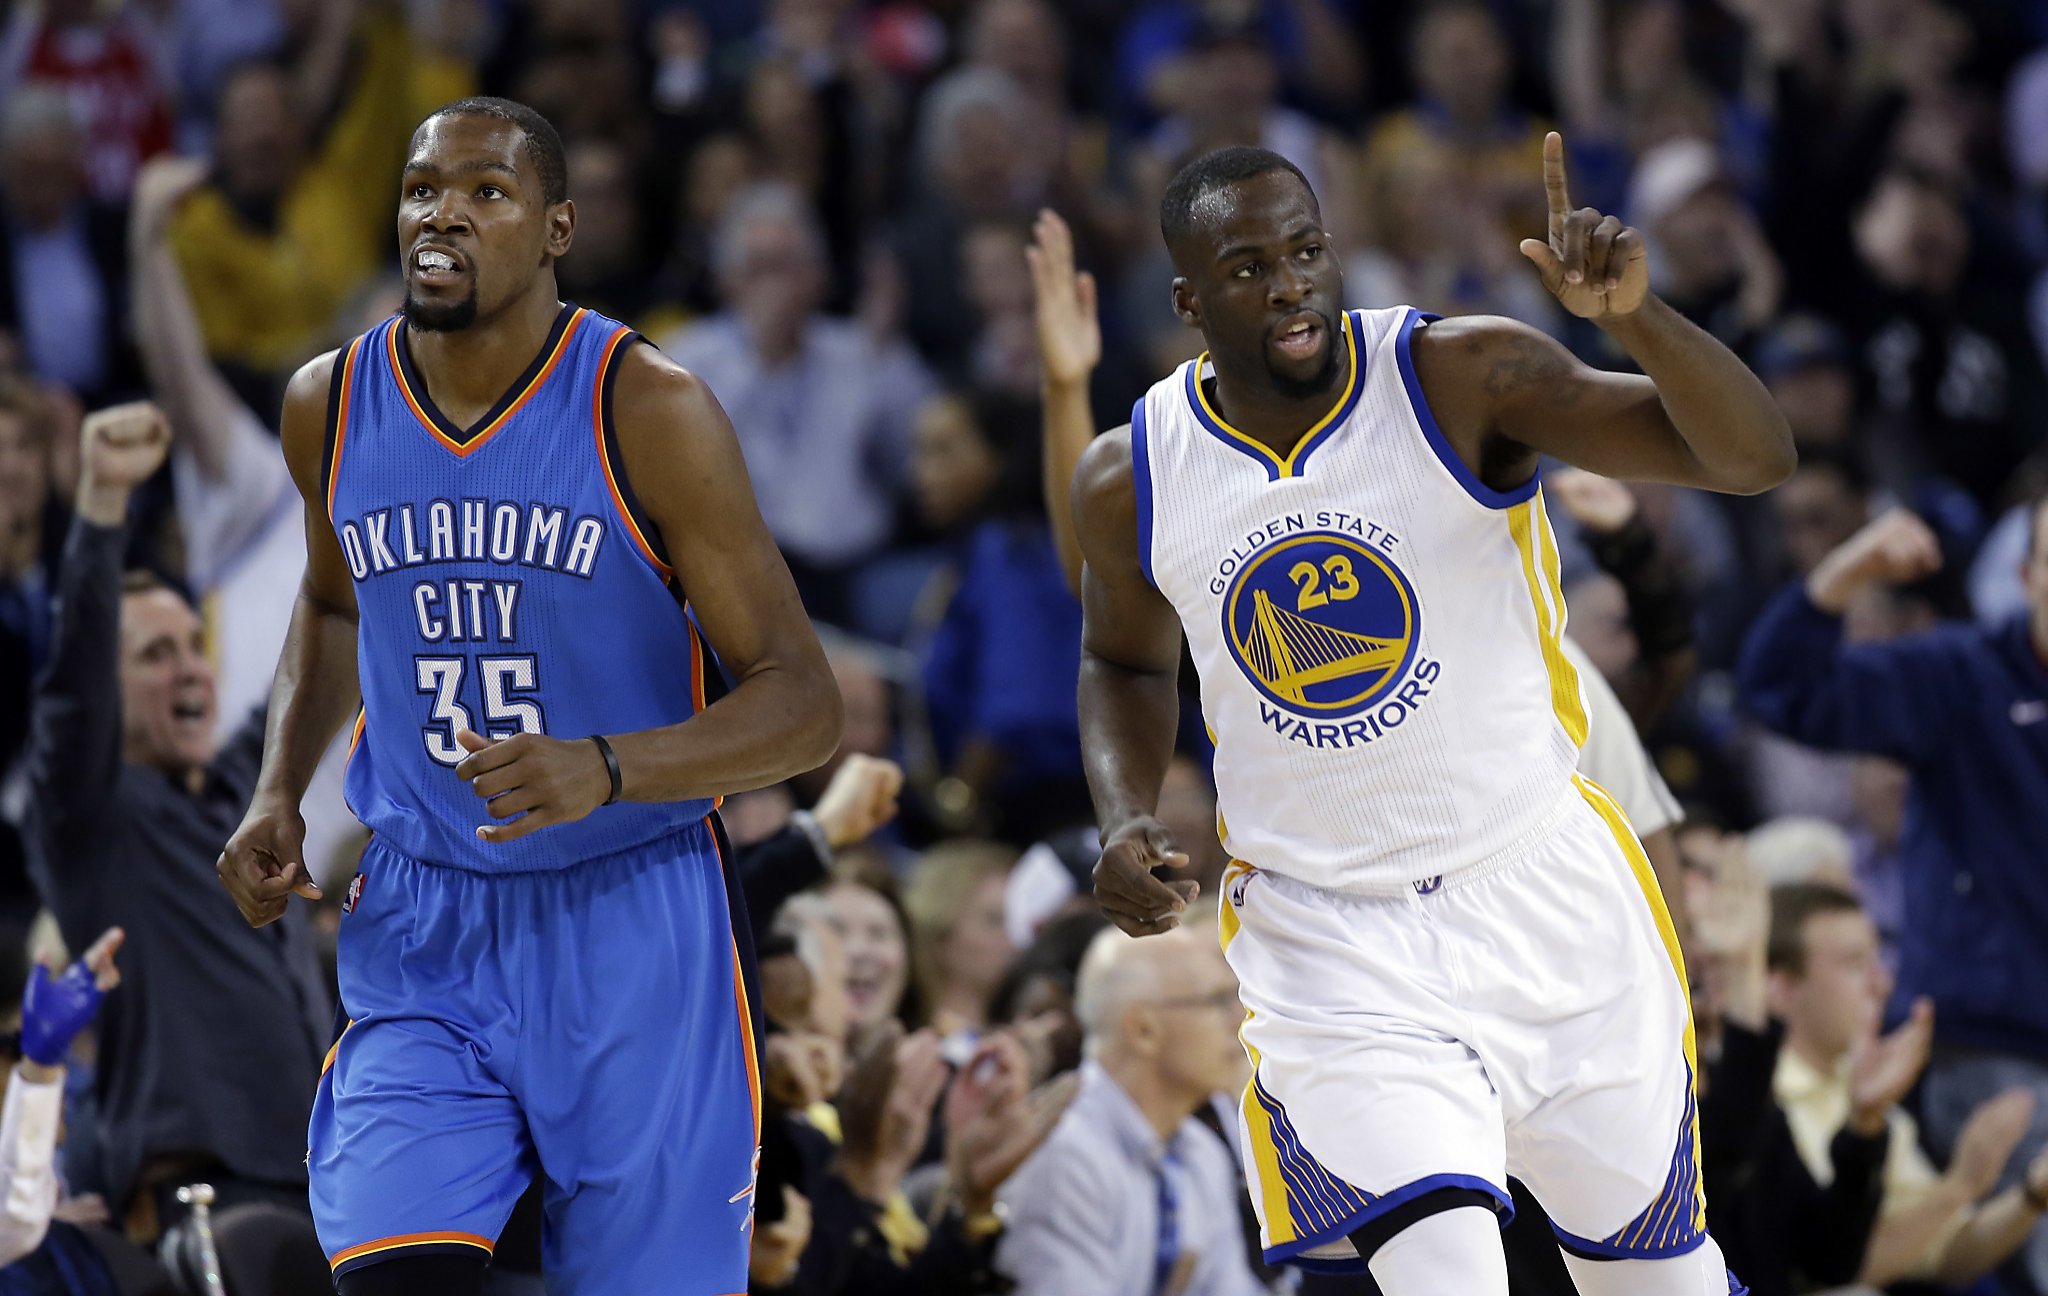 Oklahoma City Thunder: Kevin Durant to sign with the Golden State Warriors, Sports